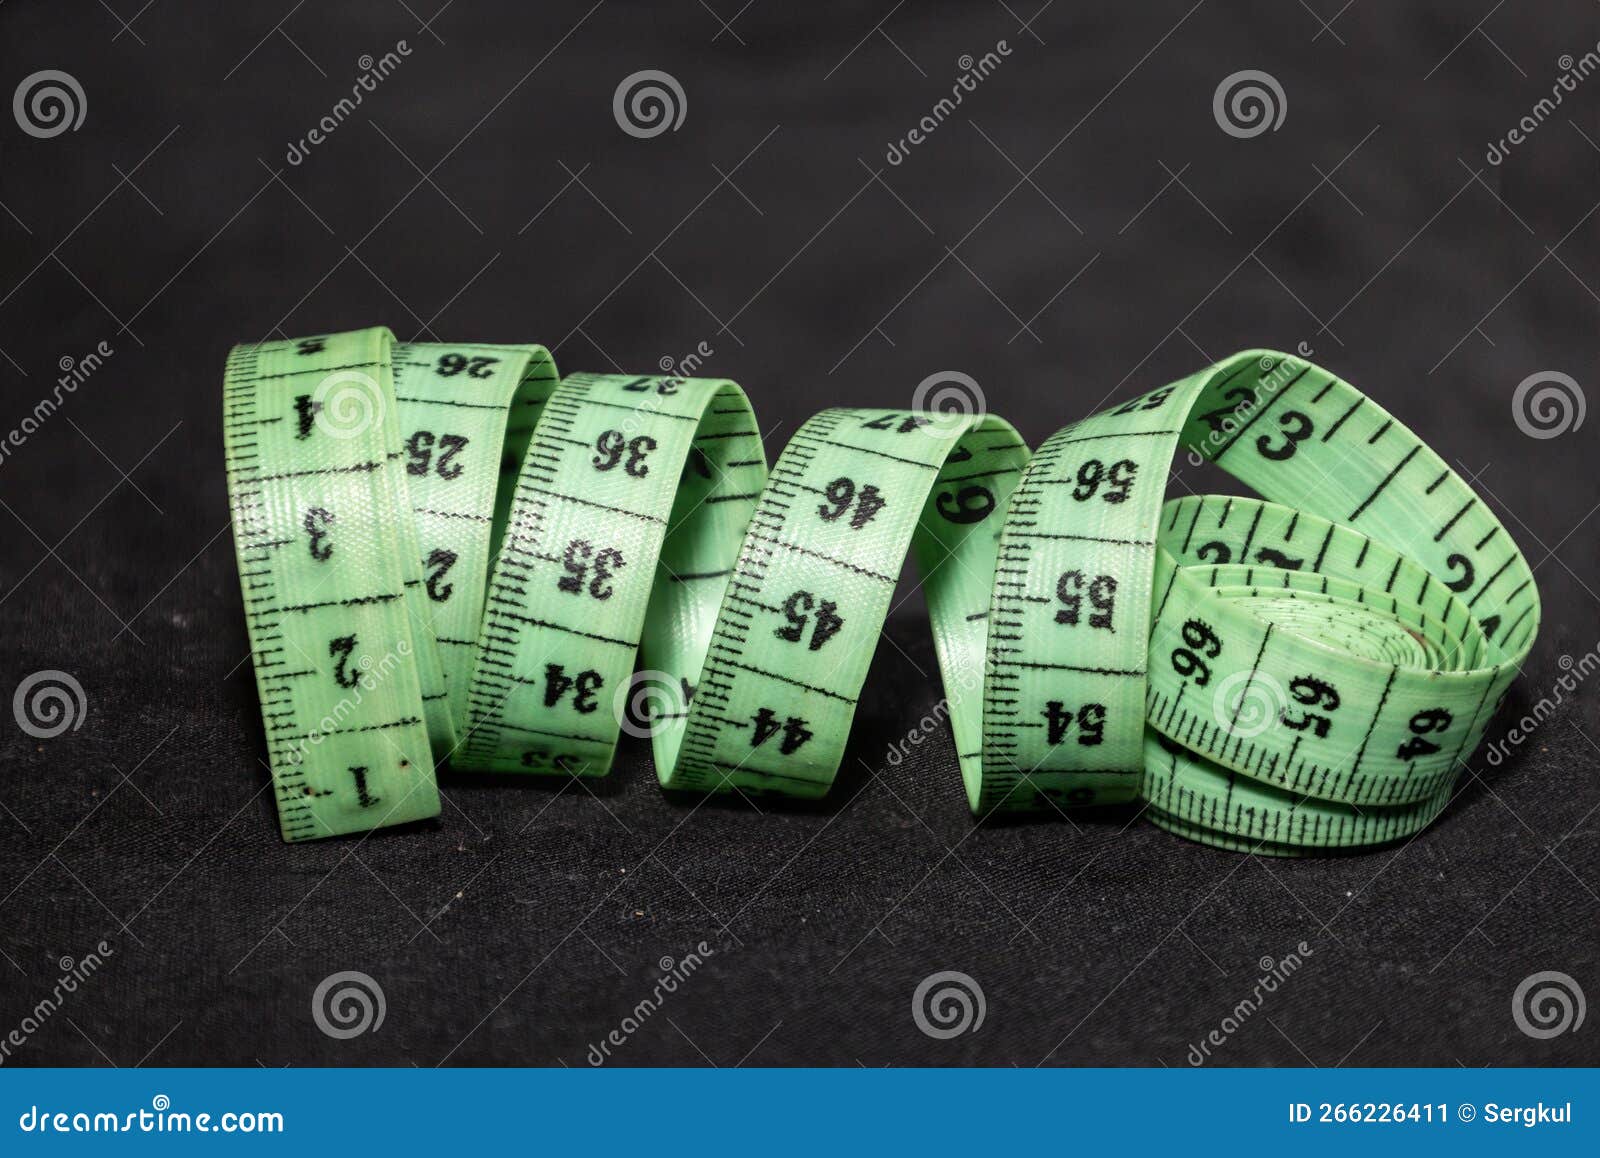 sewing measuring tape with divisions in centimeters and millimeters,